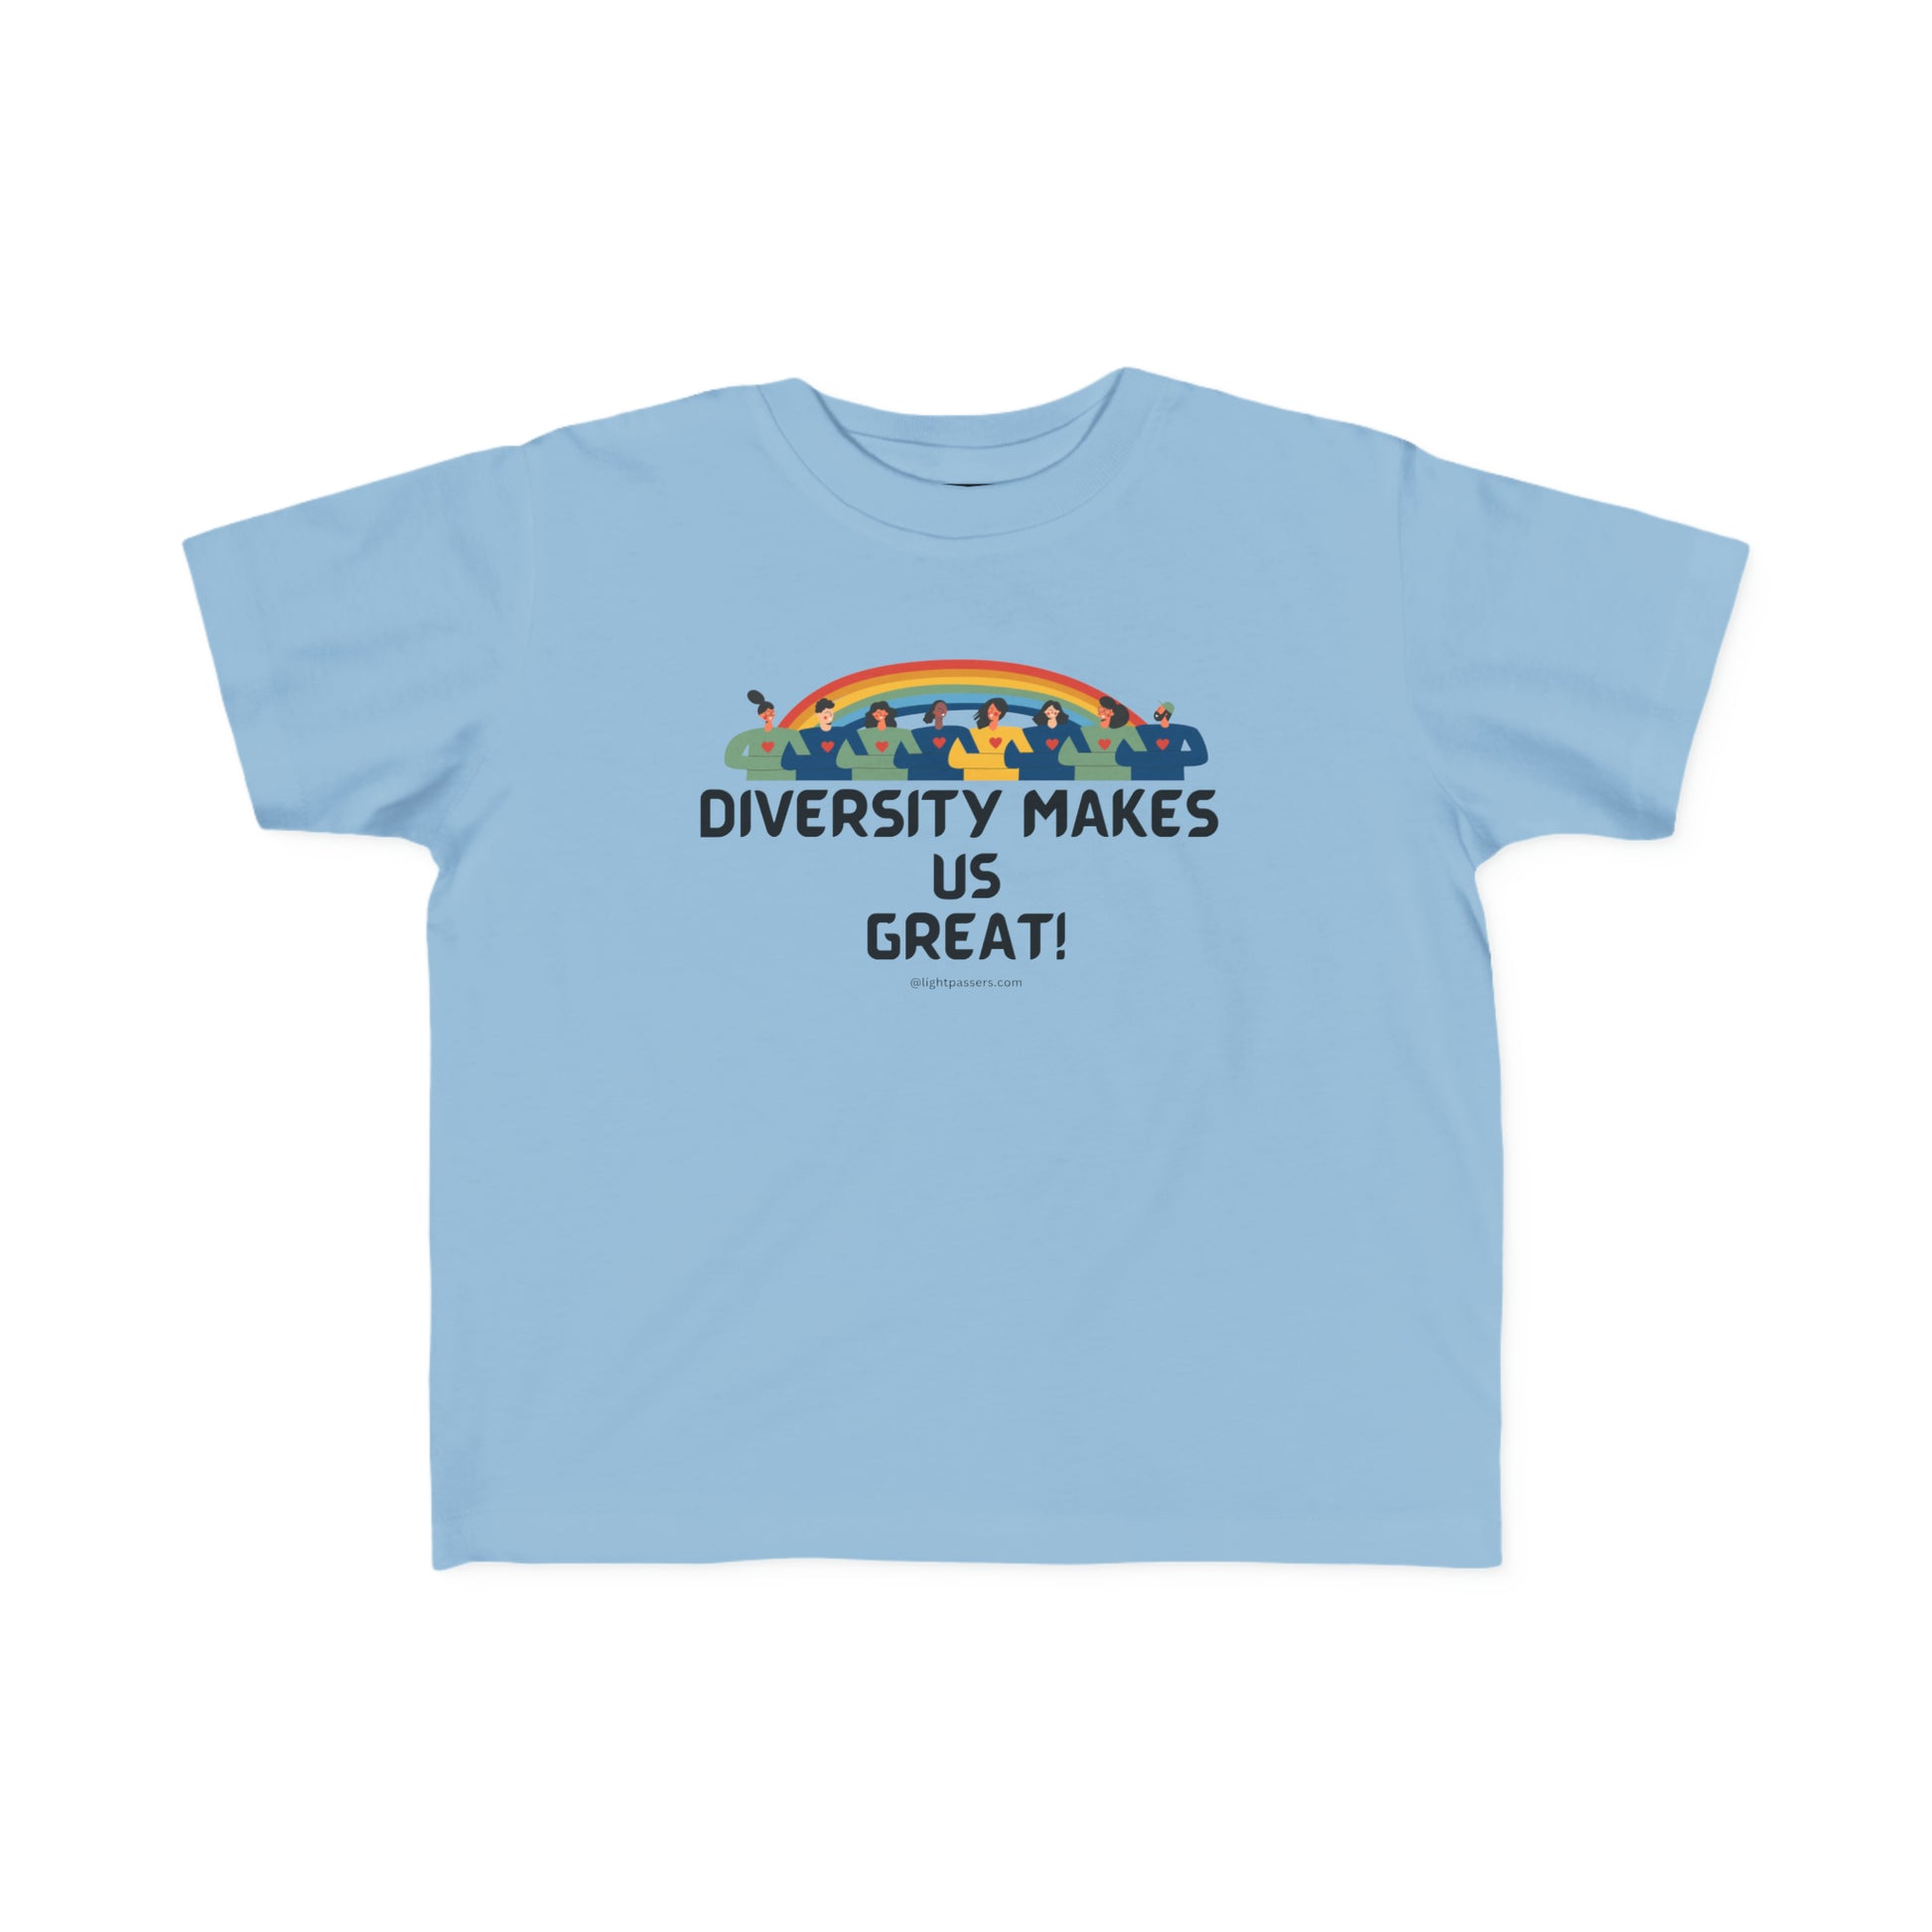 A toddler's tee featuring Diversity Makes Us Great text. Soft, 100% combed cotton, durable print, light fabric, classic fit, tear-away label, true to size.